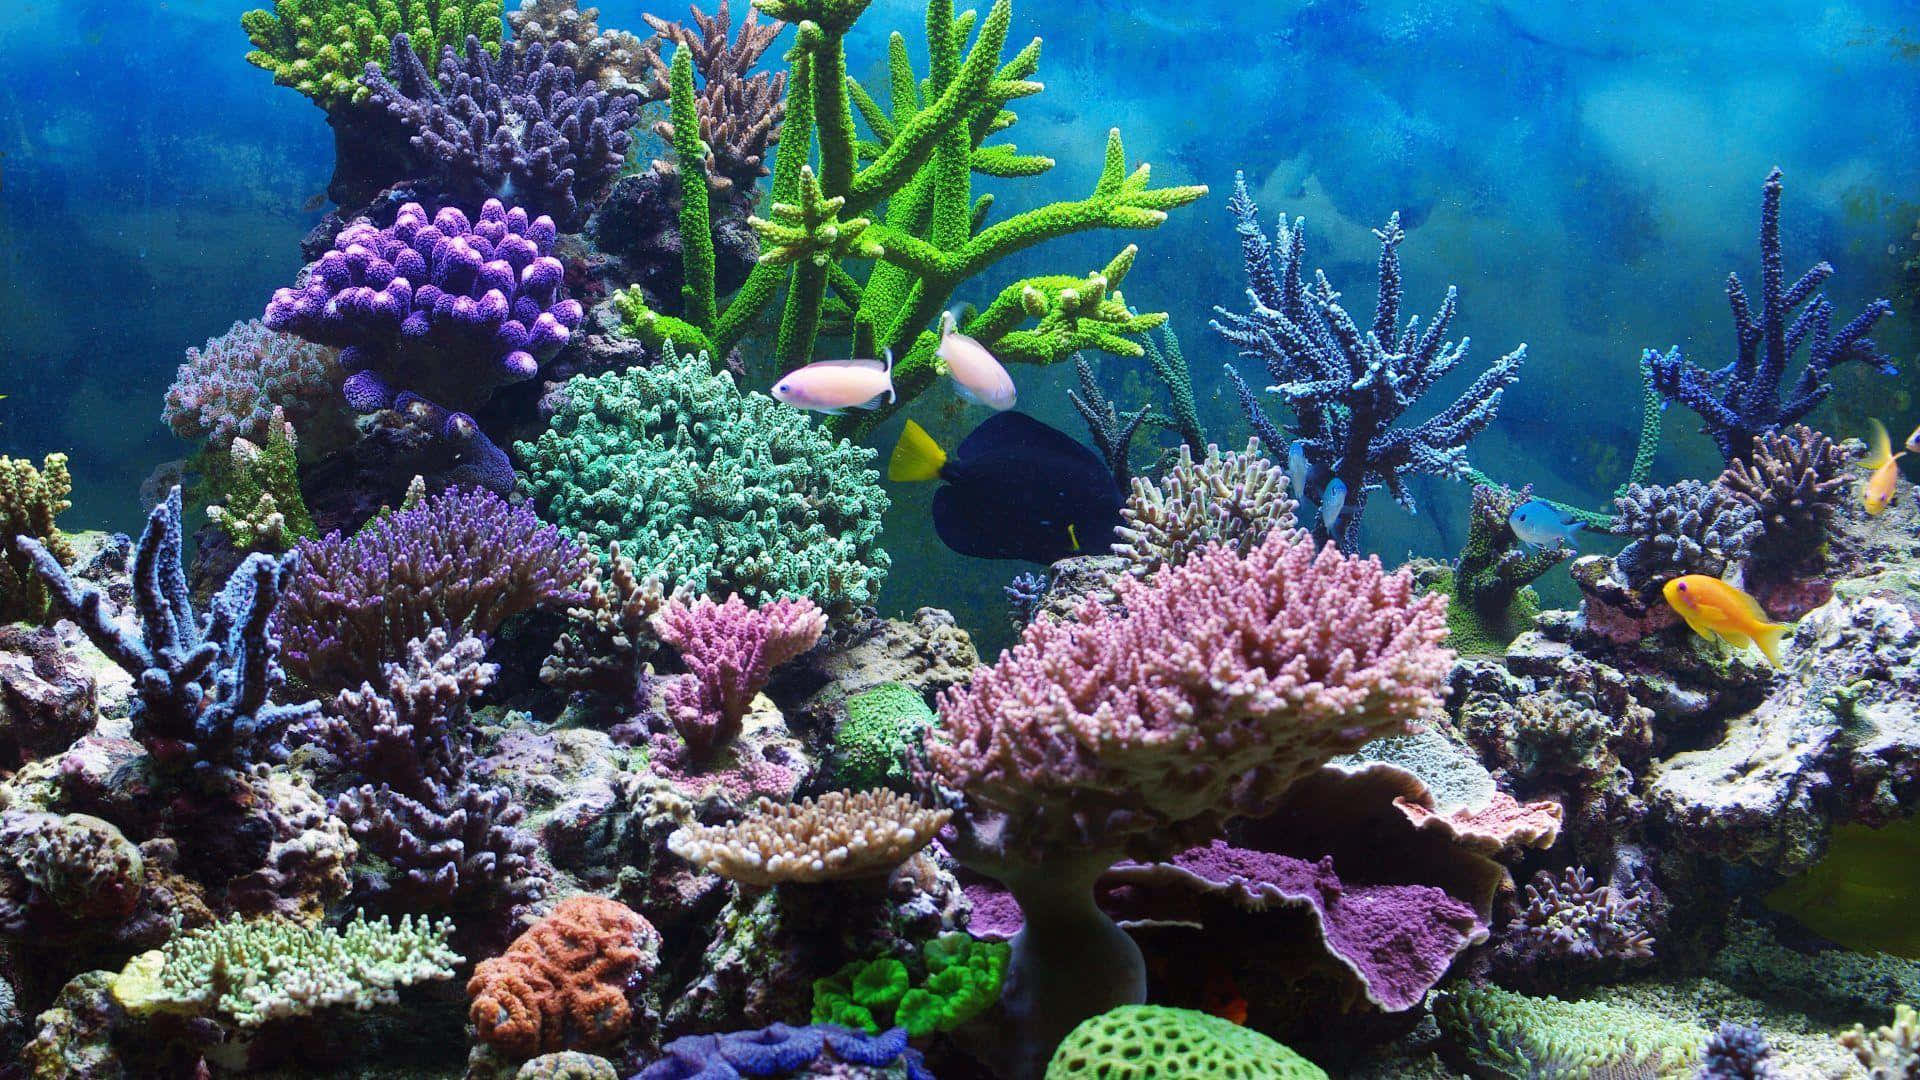 "Discover the Unique Beauty of Coral Reefs"